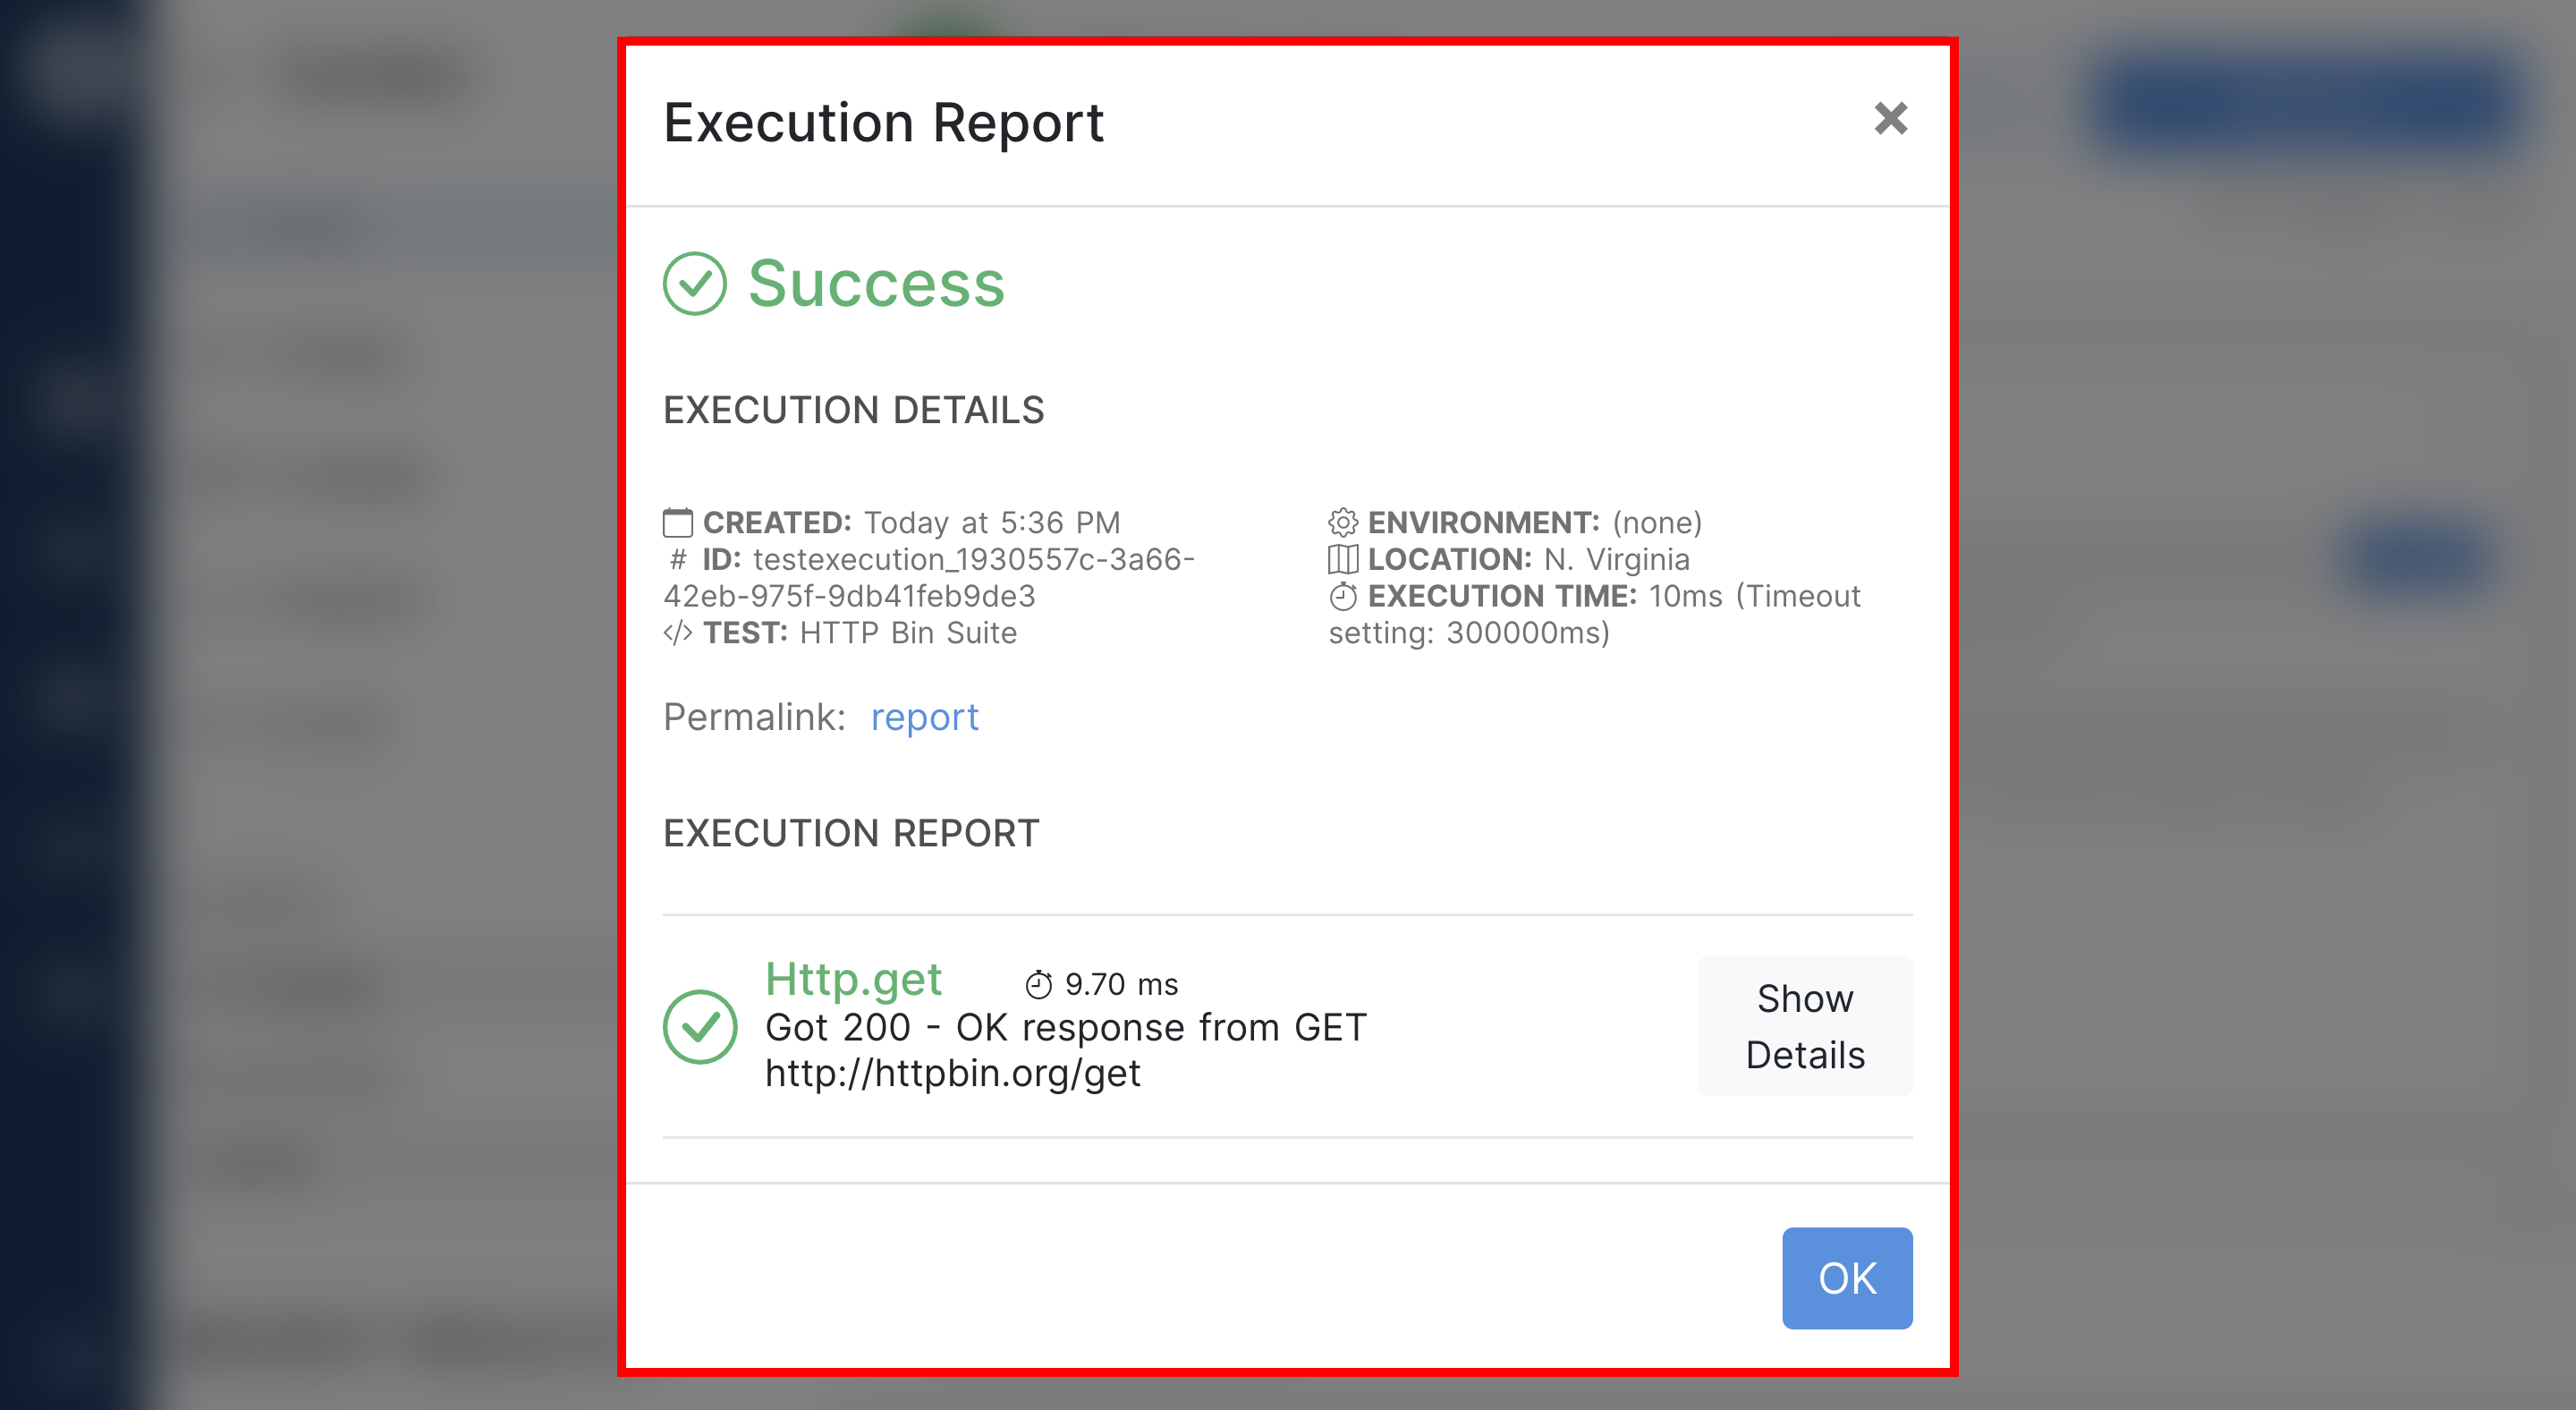 Execution Report for detailed information